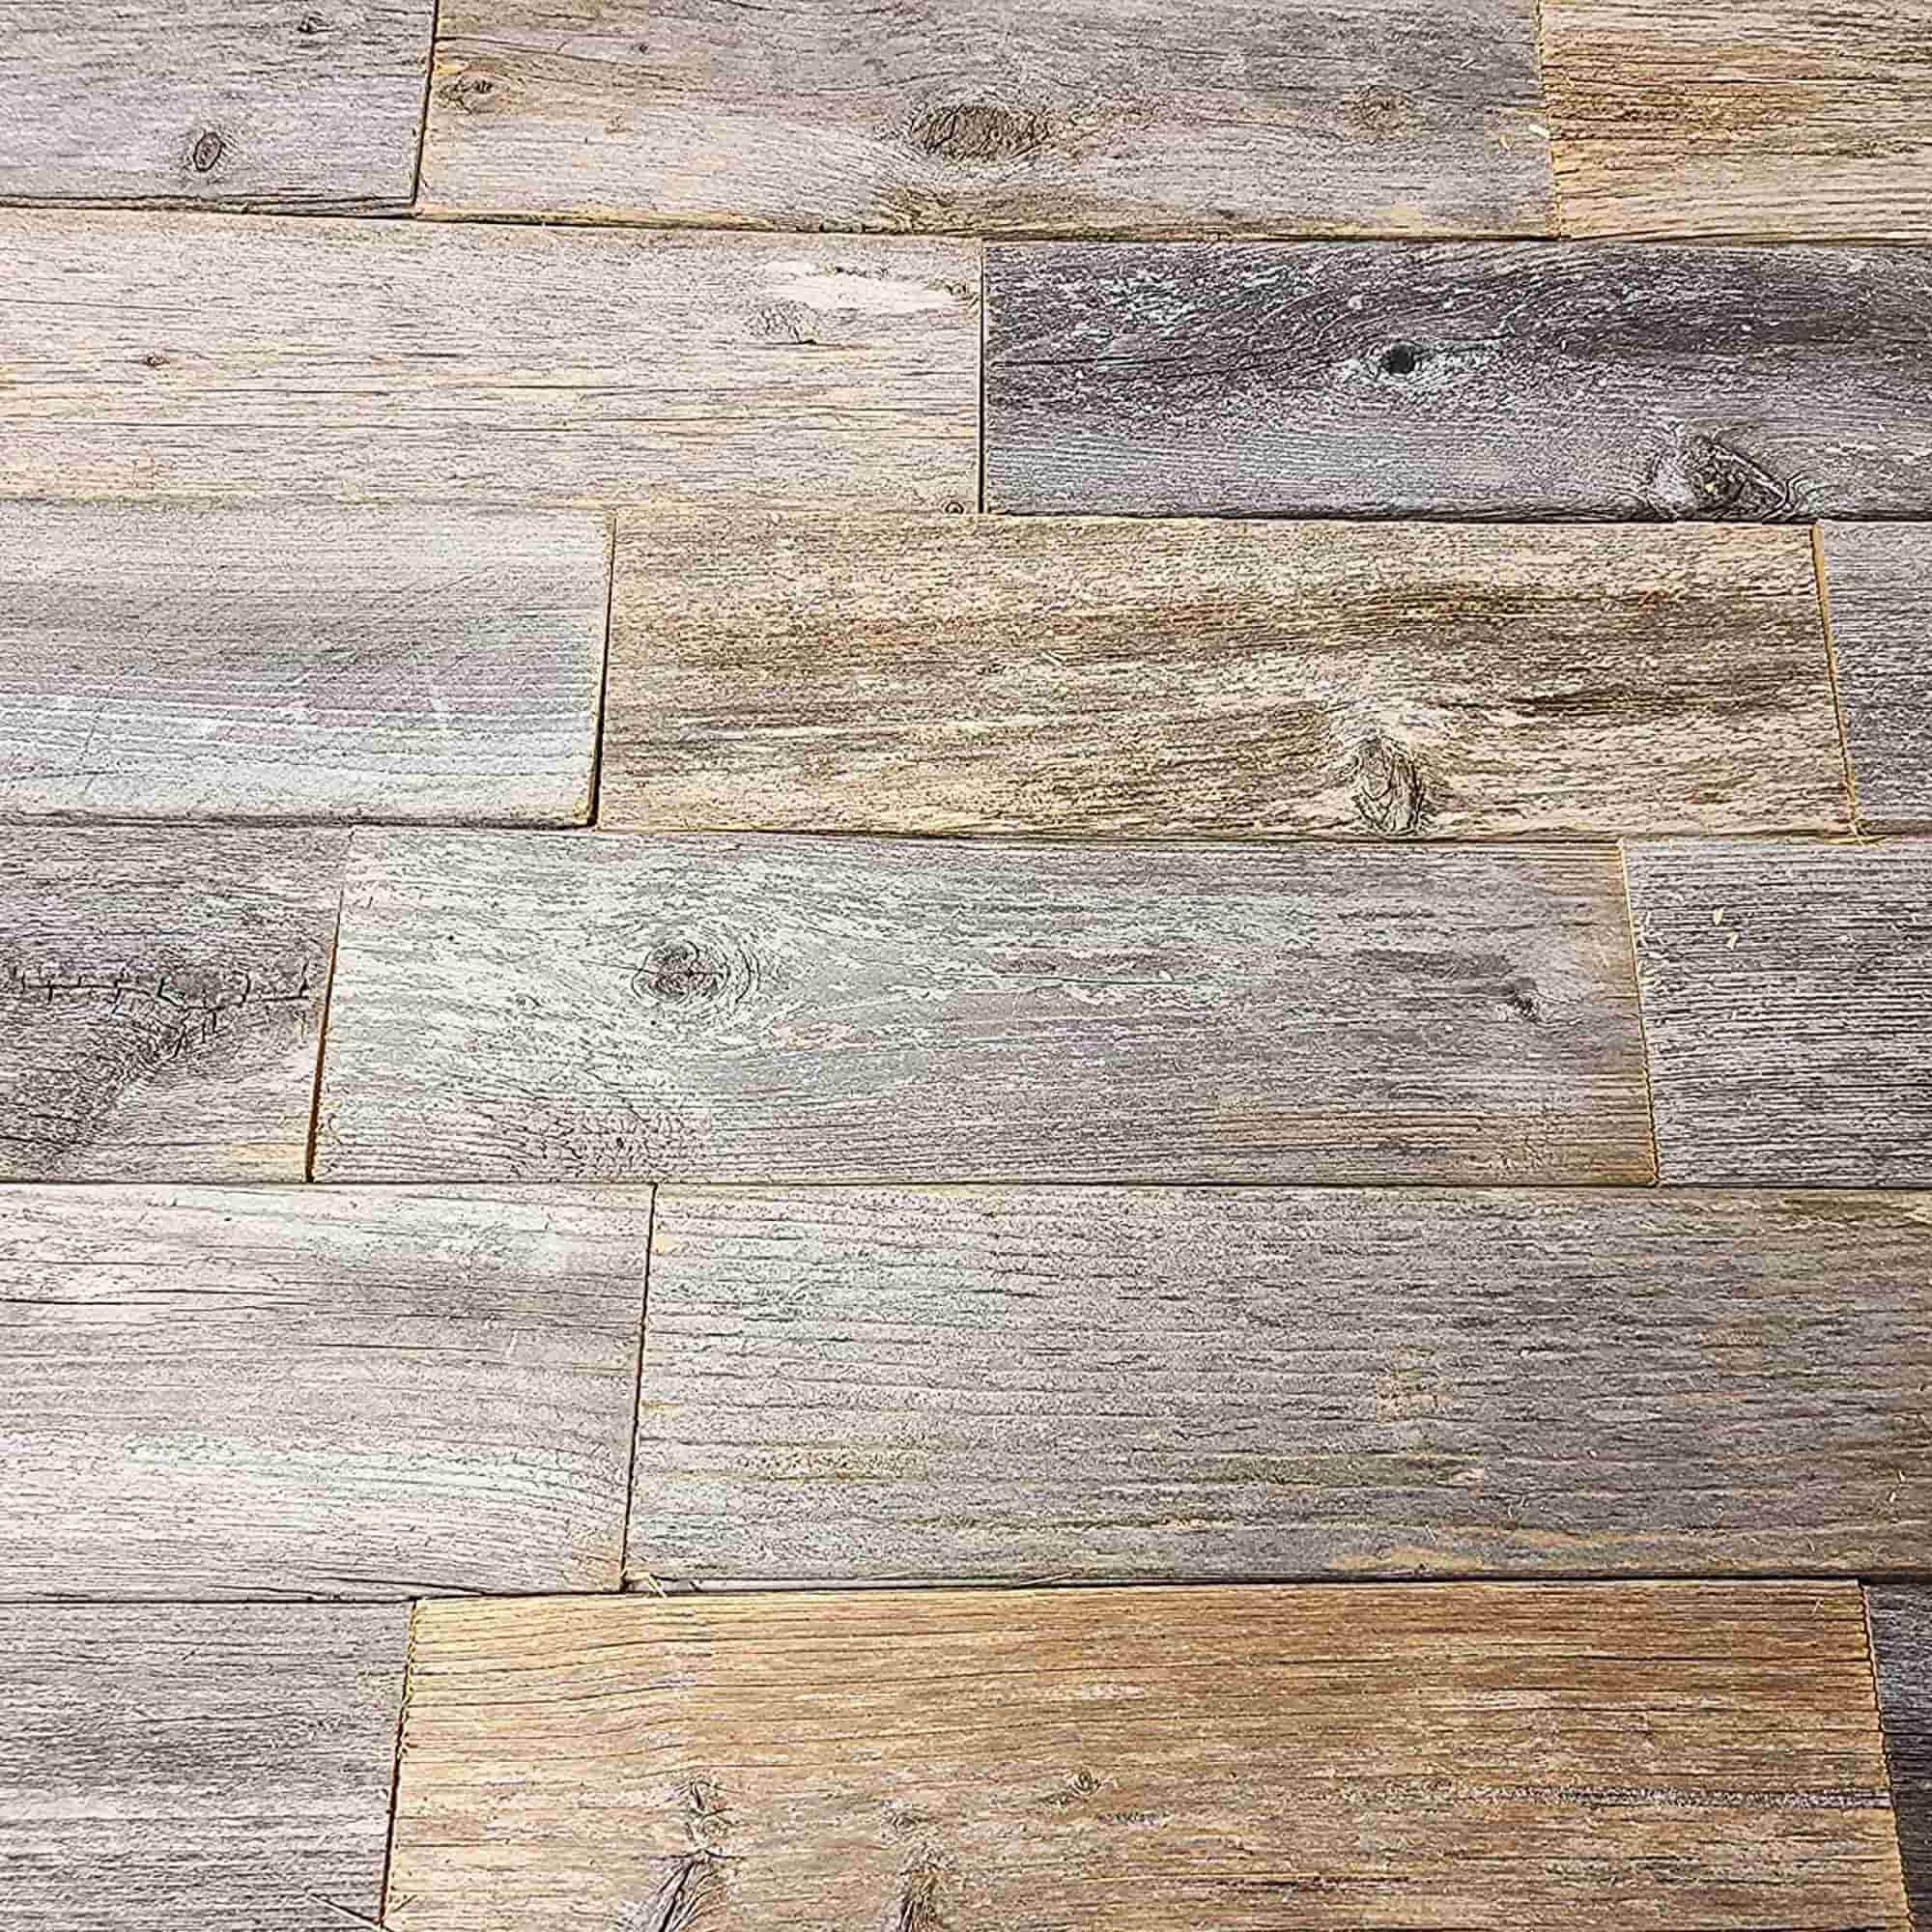 15 Reclaimed Wood Planks for Crafts and DIY Projects, Wood Crafts